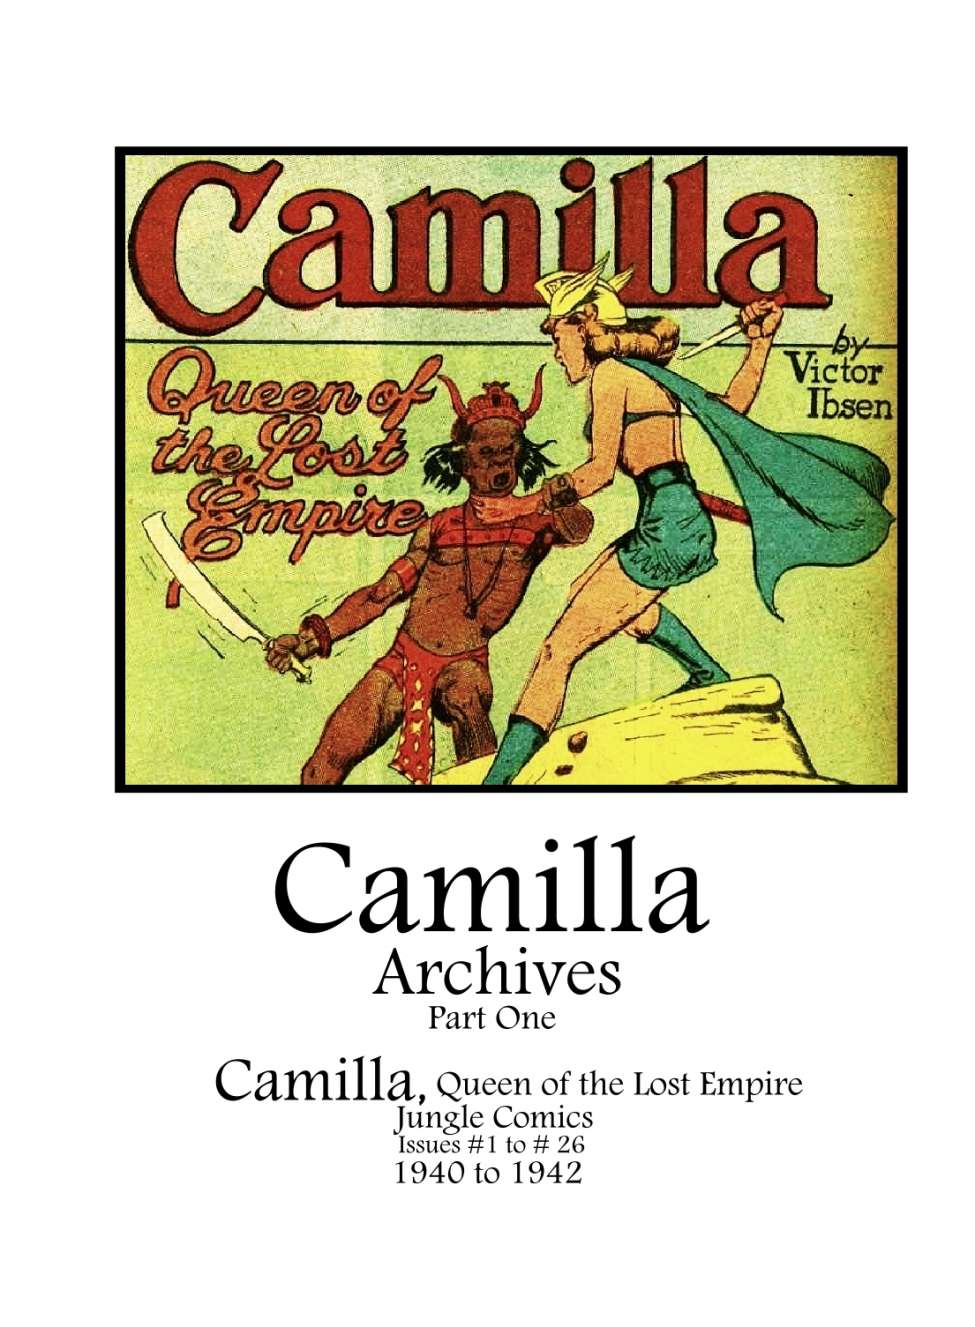 Book Cover For Camilla Archives Part 1 (1940-1942)